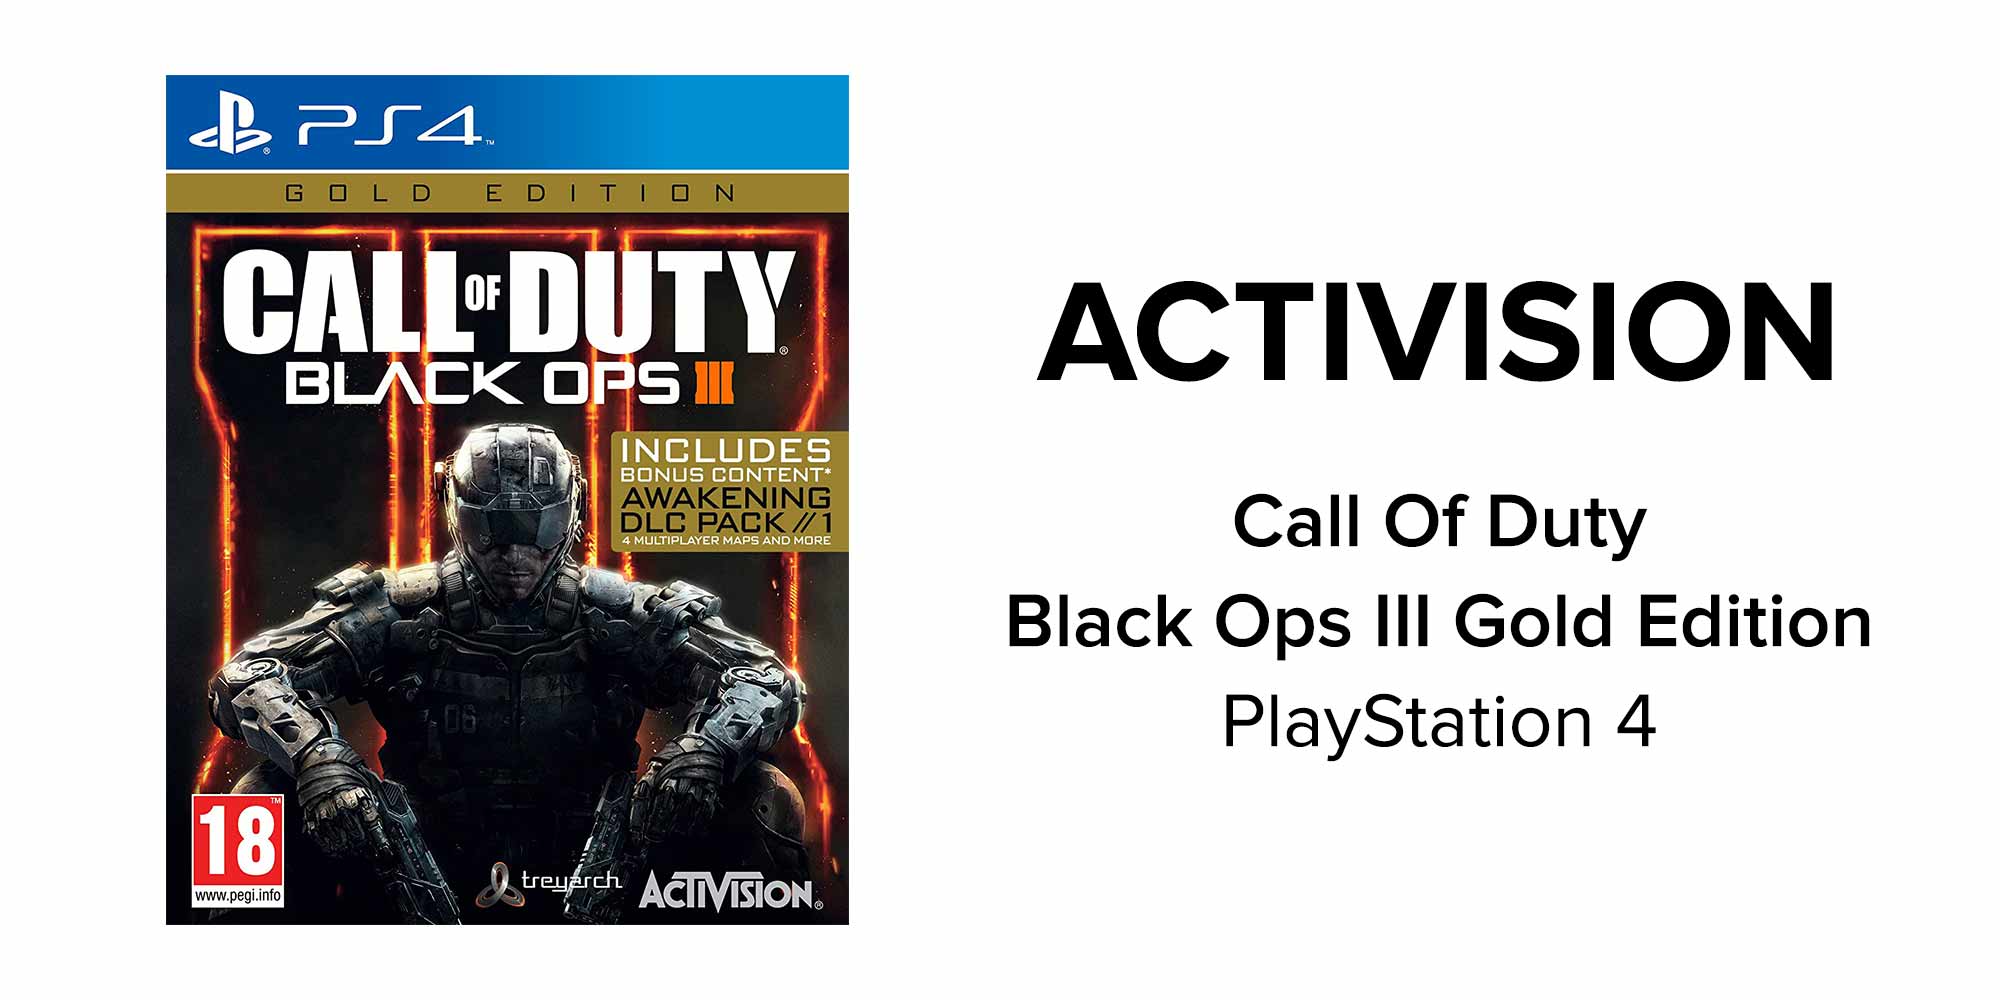 Call Of Duty Black Ops III - Action & Shooter - PlayStation 4 (PS4)